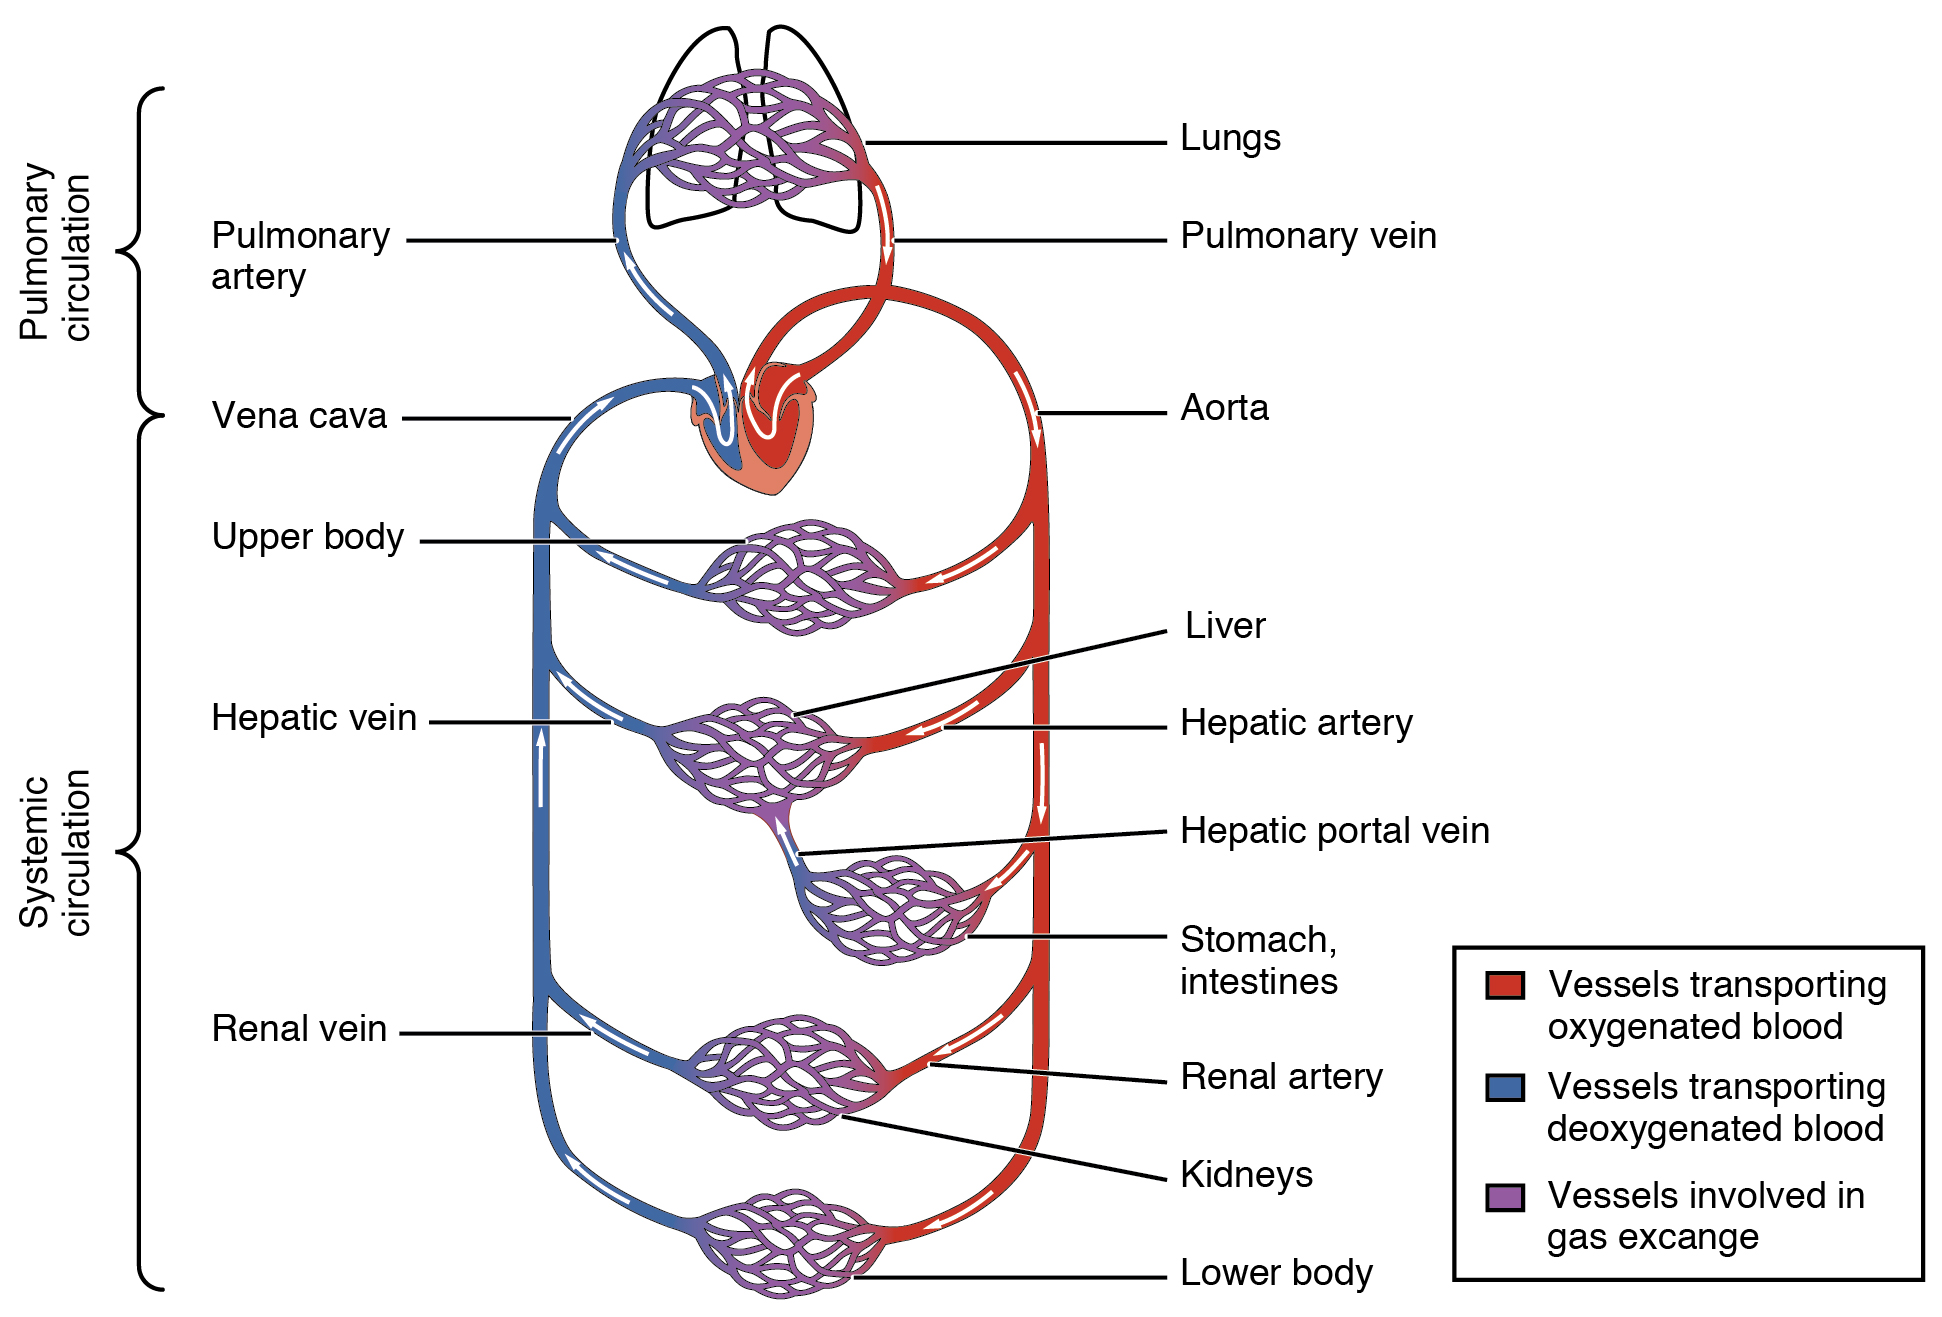 The systemic circulation and capillary networks shown and also as separate from the pulmonary circulation.